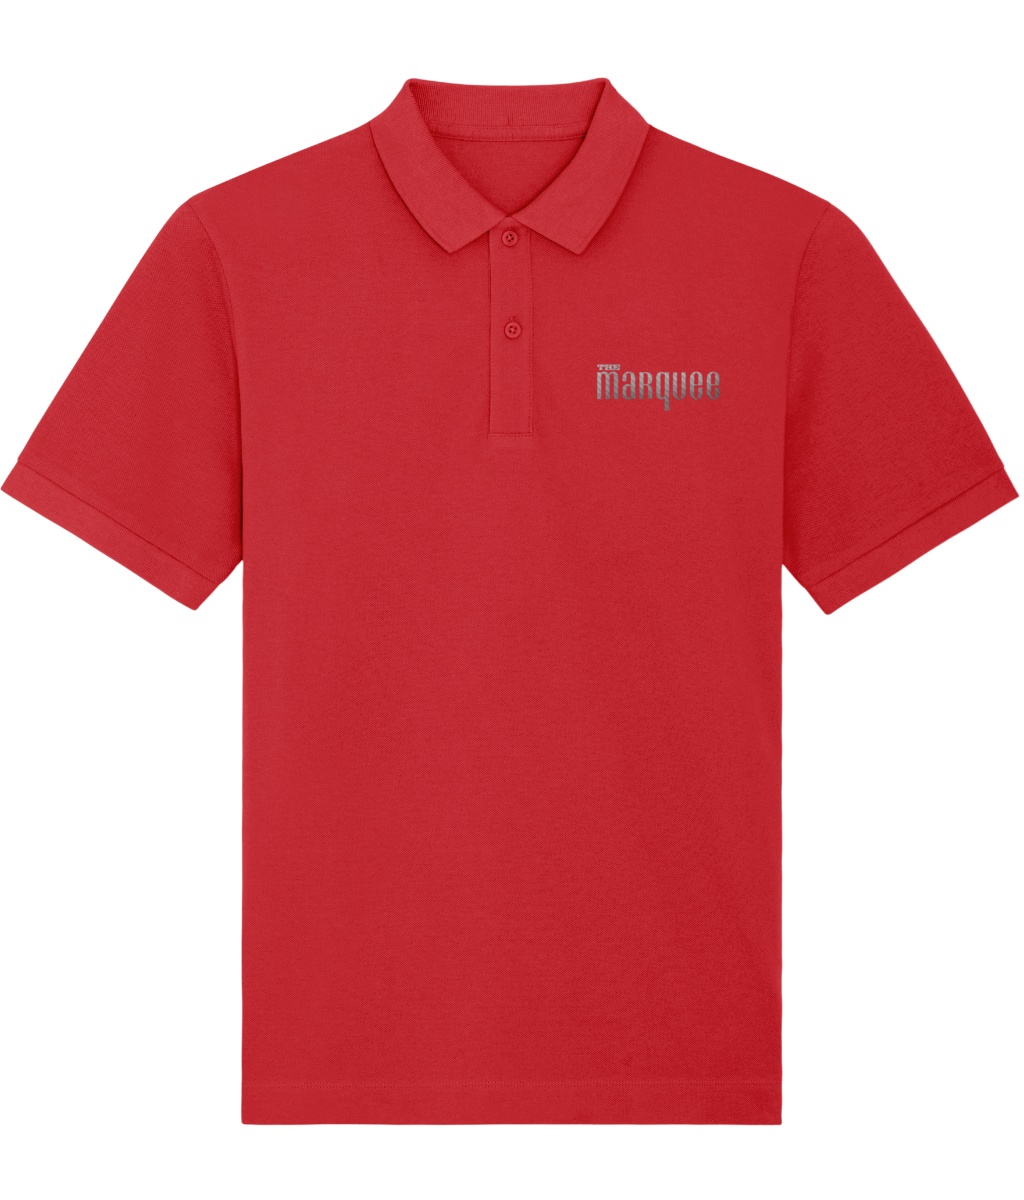 The Marquee Embroidered Polo Shirt